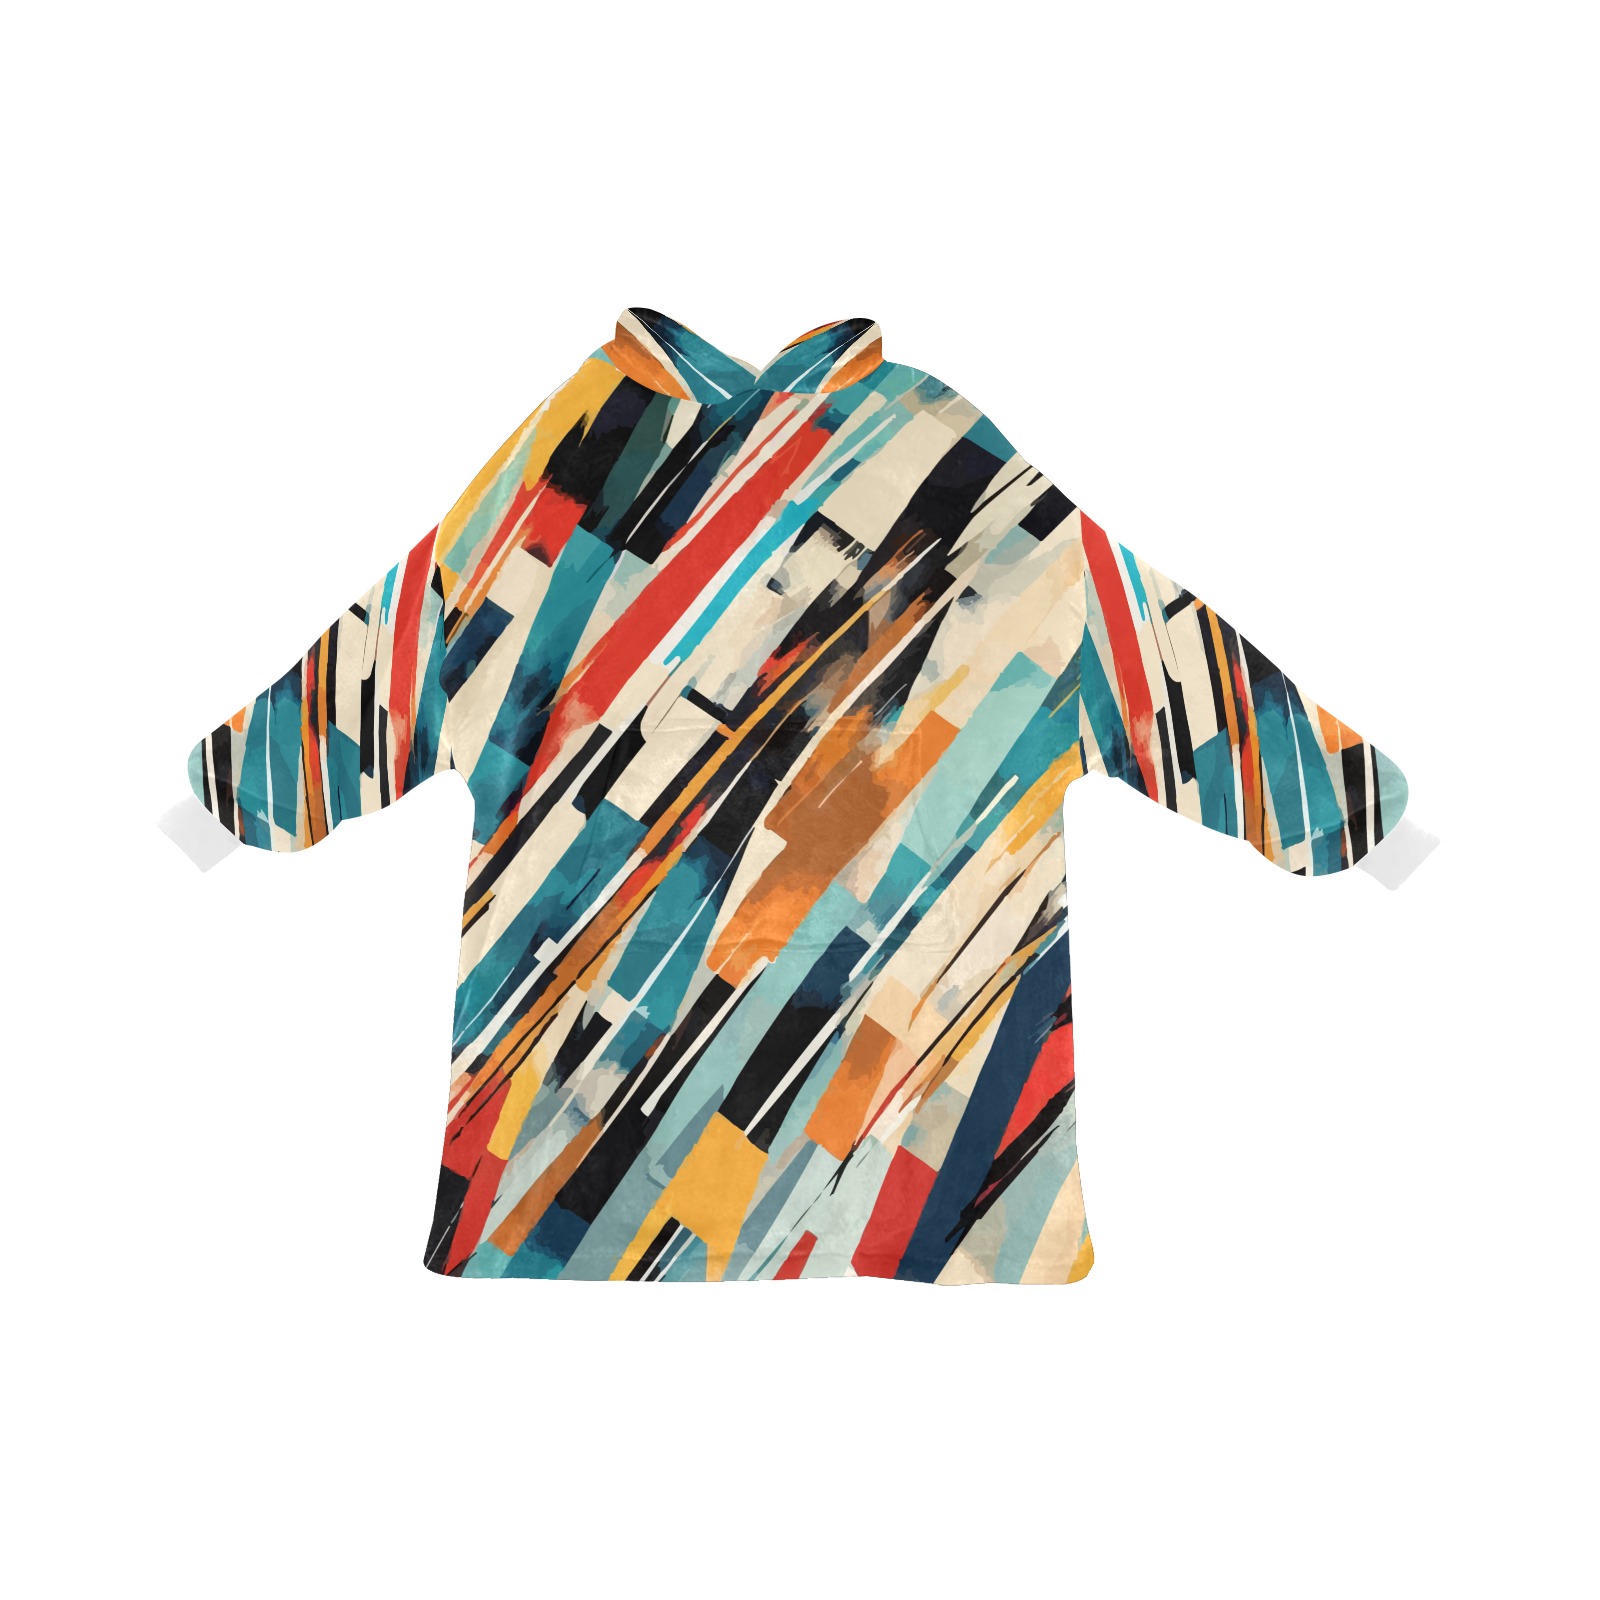 Classy abstract art of shapeless forms and colors Blanket Hoodie for Men